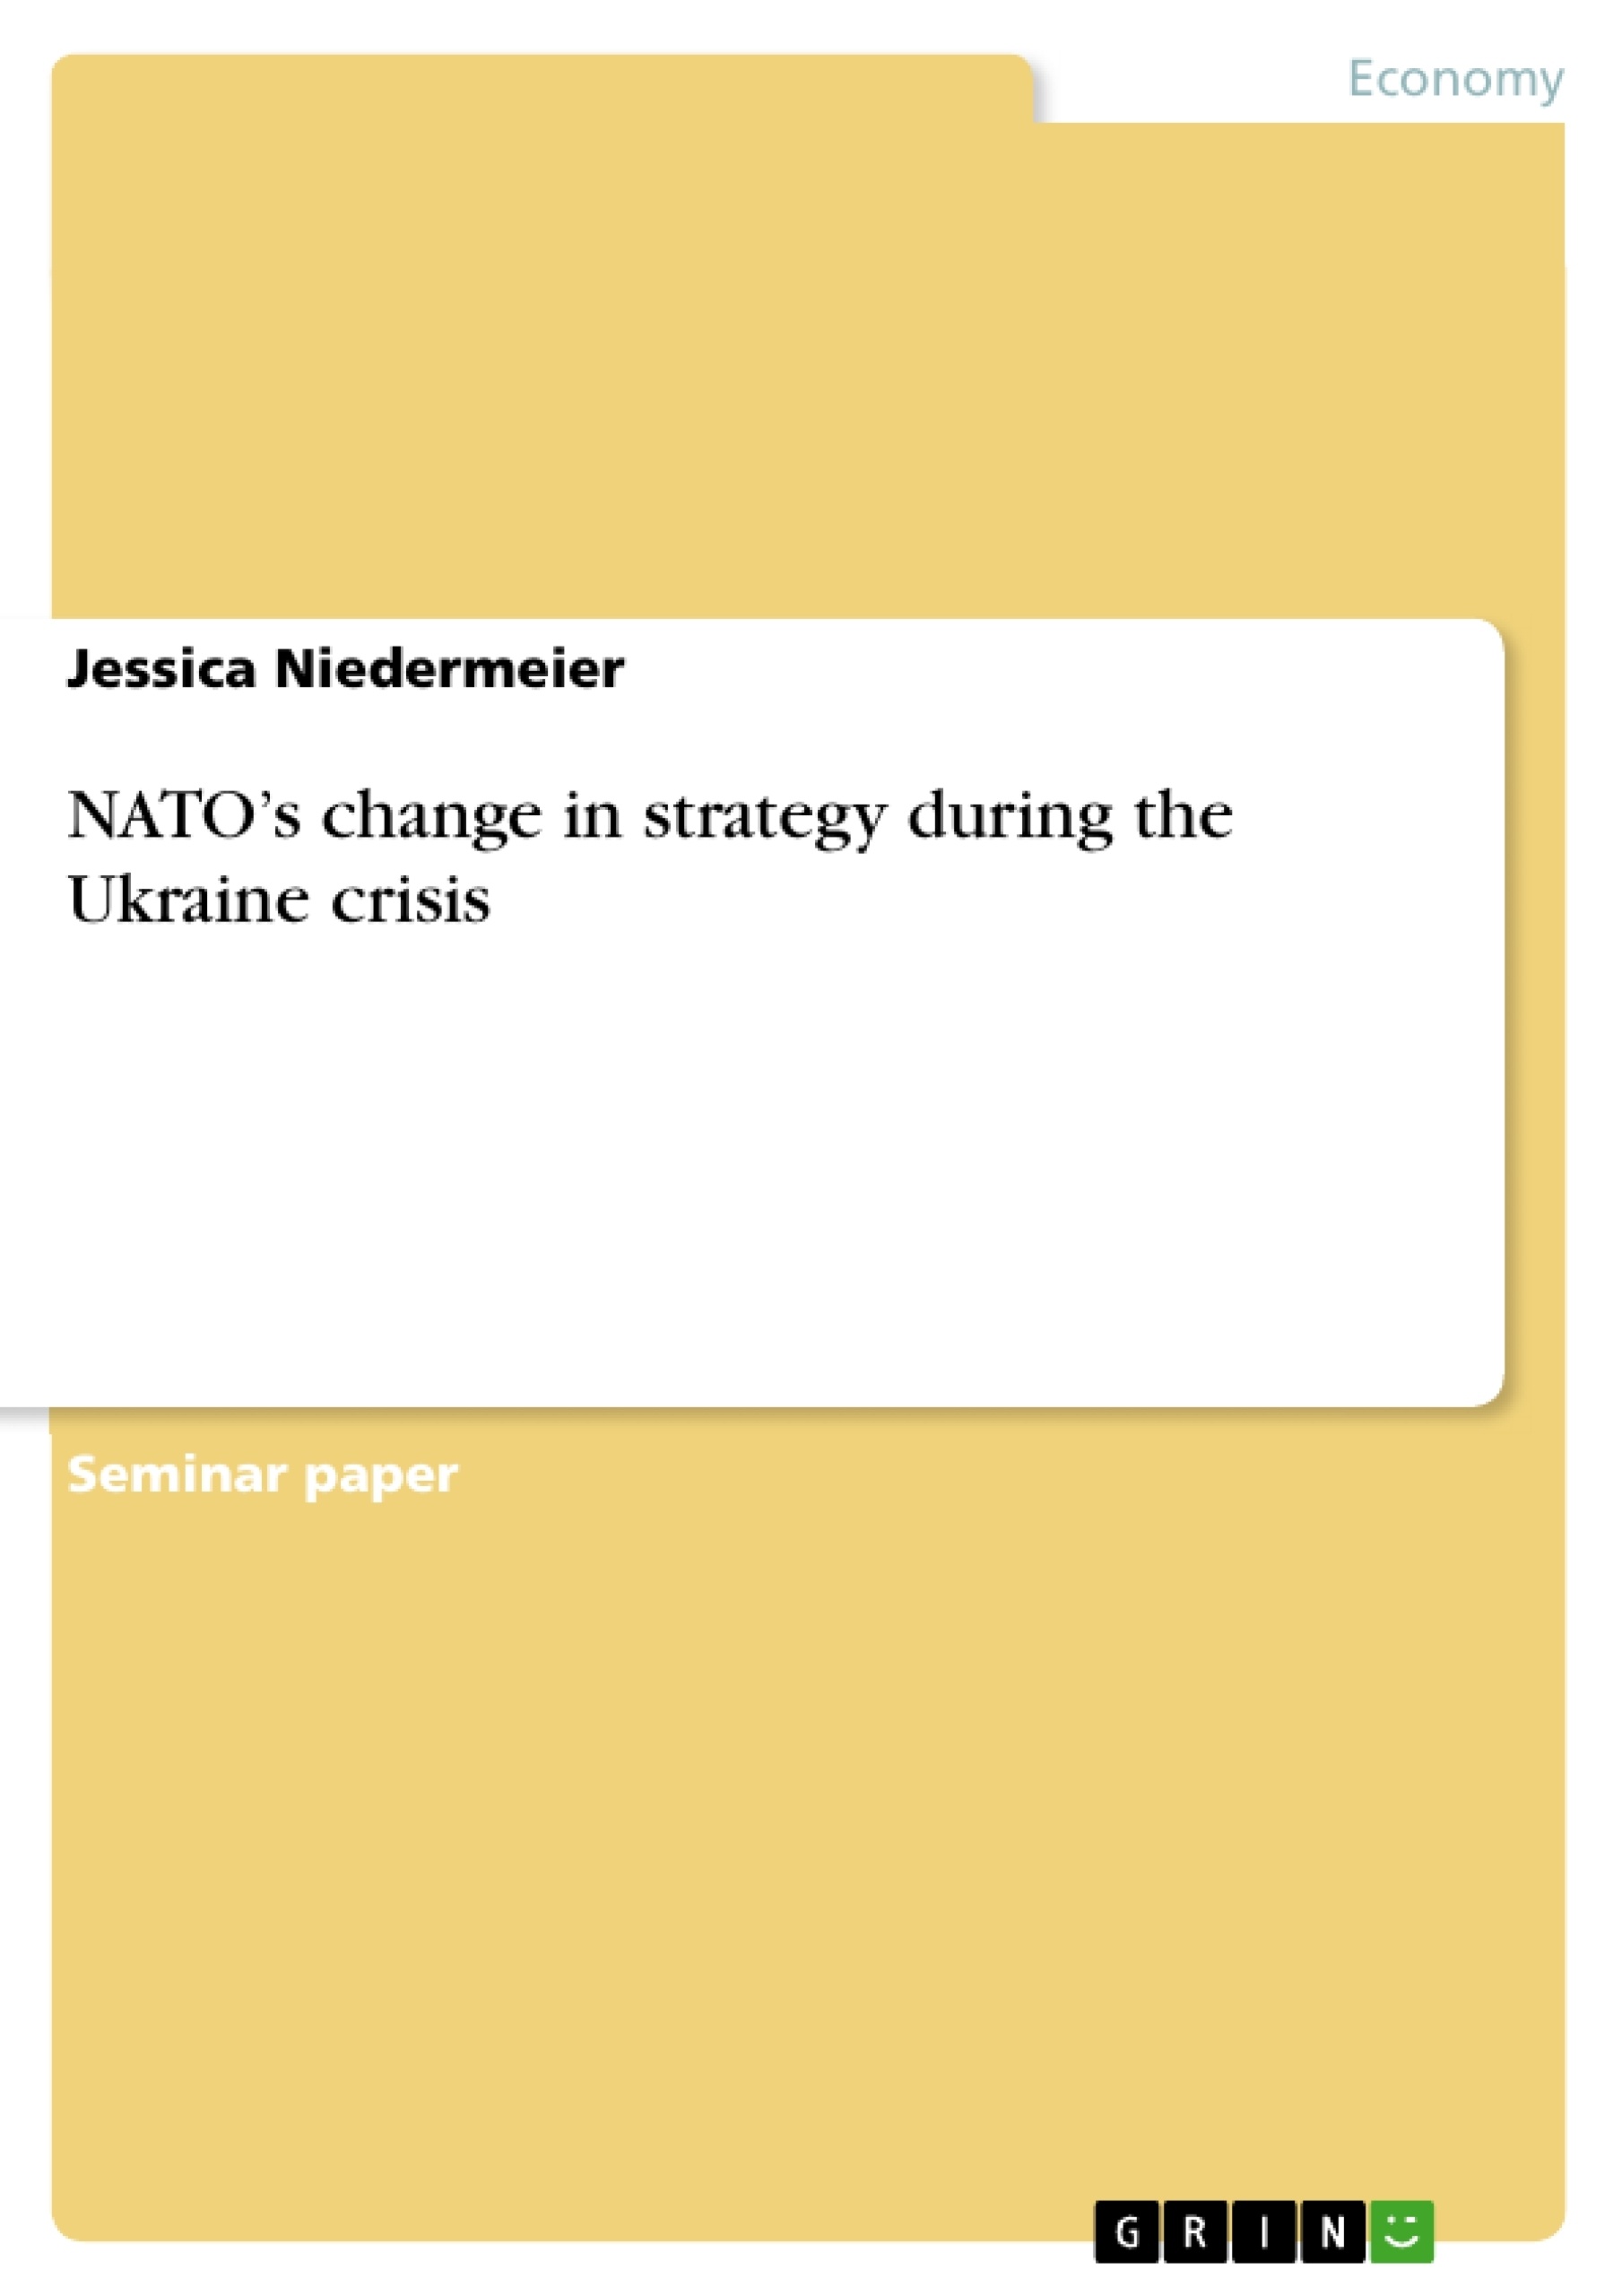 Title: NATO’s change in strategy during the Ukraine crisis